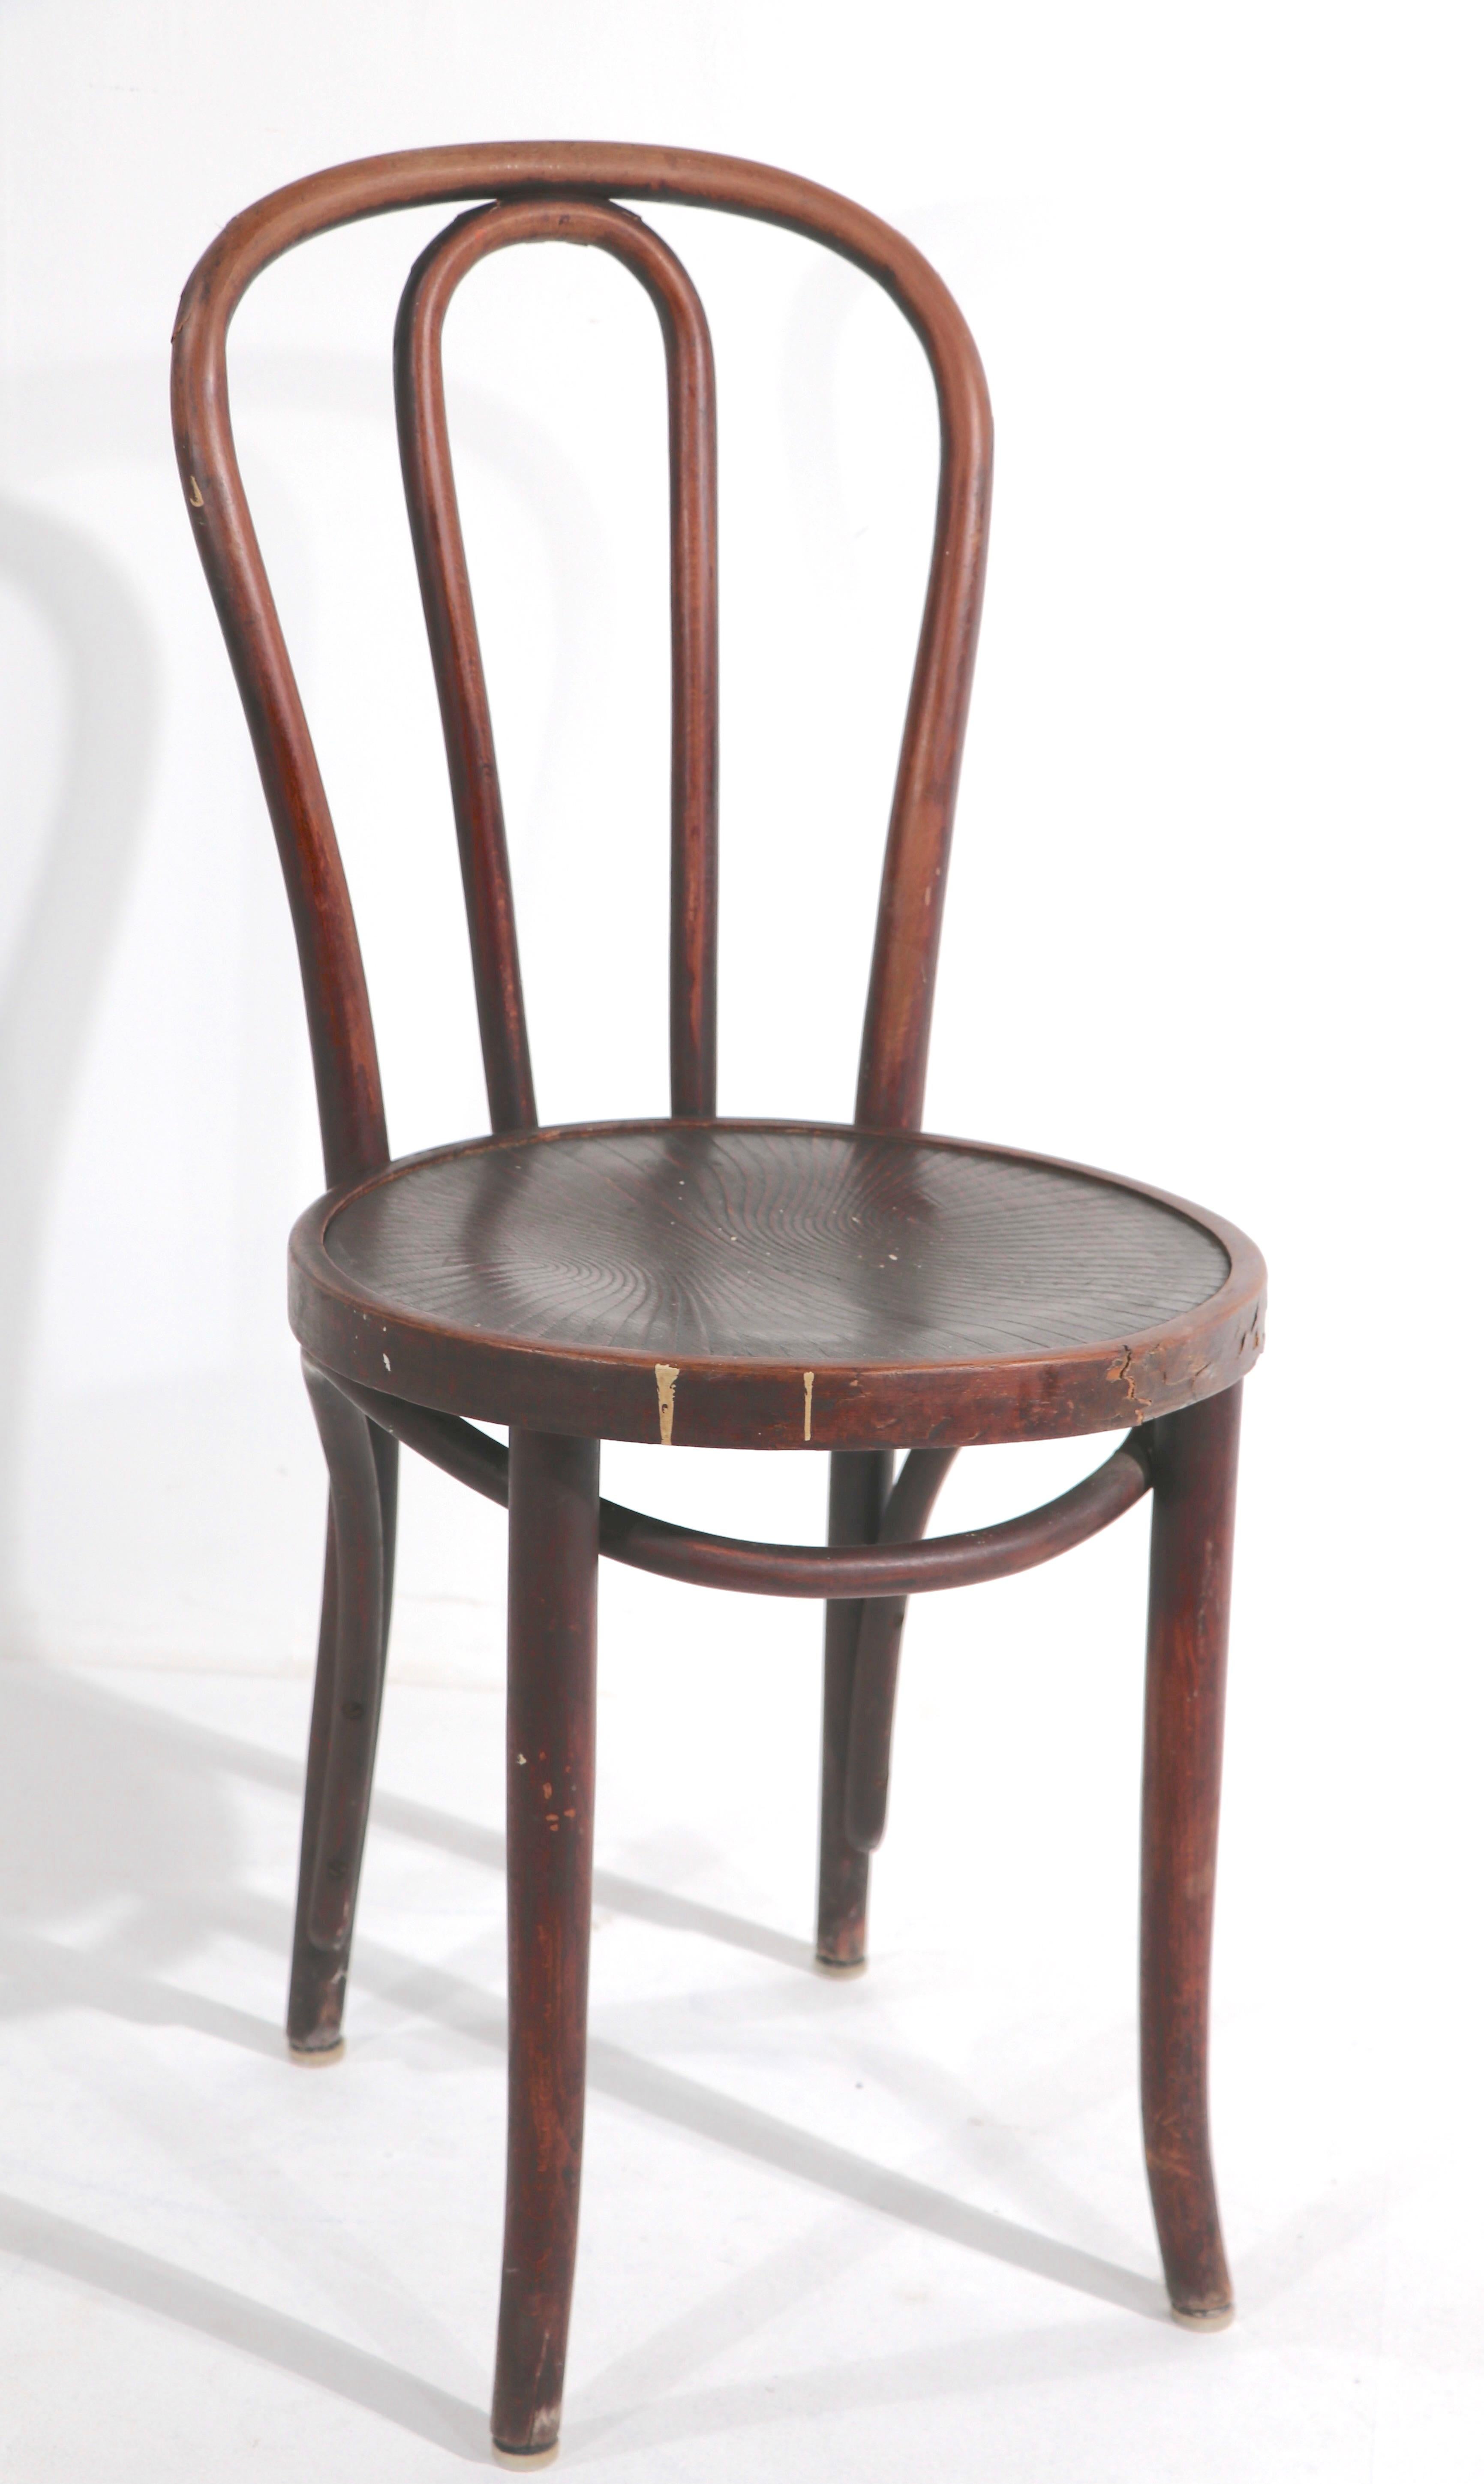 Nice set of four antique bentwood dining chairs attributed to Thonet. The chairs are all structurally sound and sturdy, all show cosmetic signs of age and use.
Priced and offered as a set of four.
 